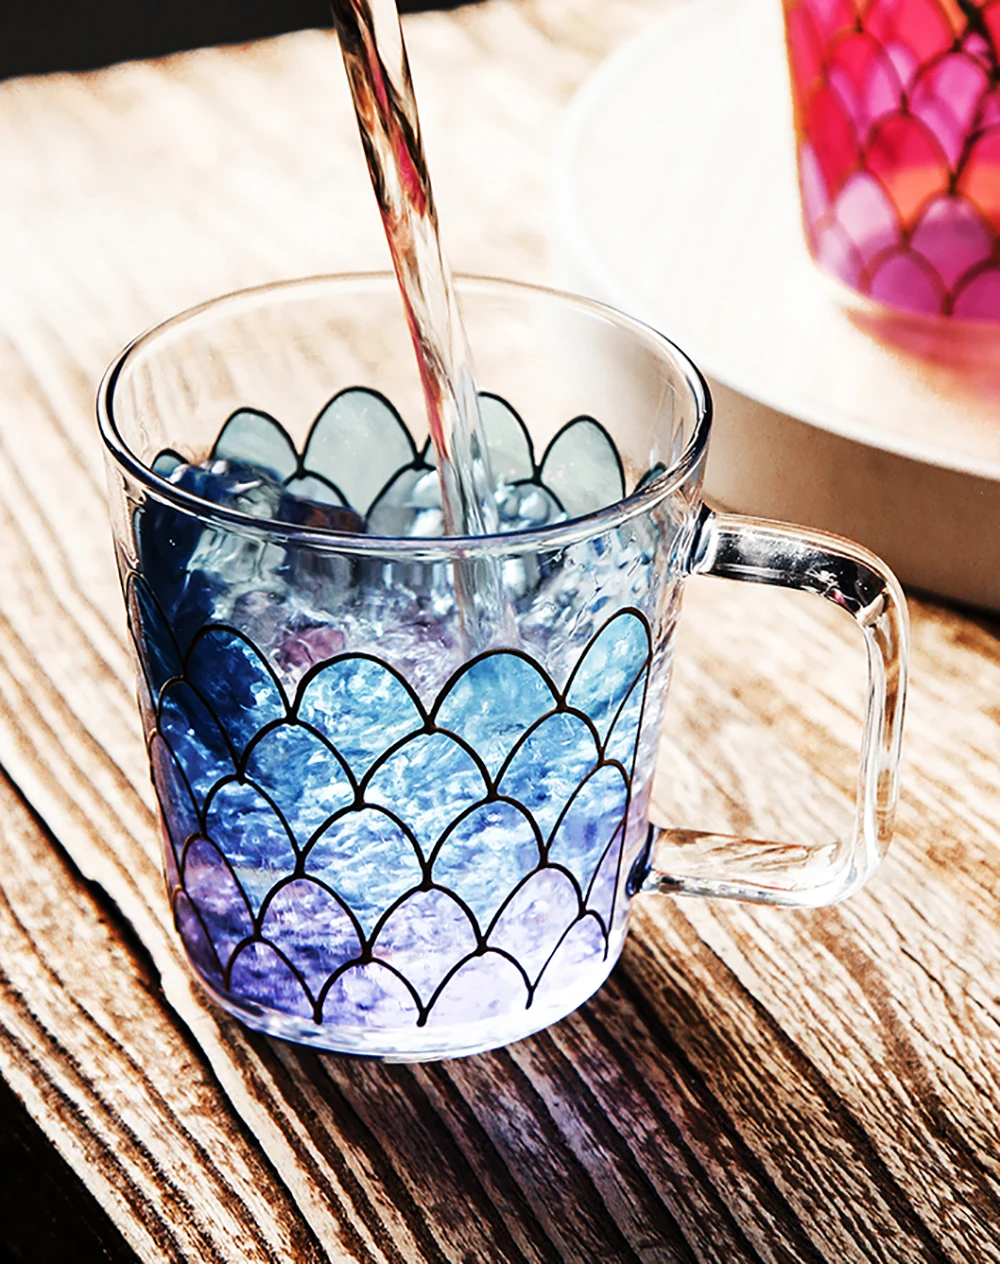 Original Fish Scale Stained Glass Mug Heat-resistant Glasses